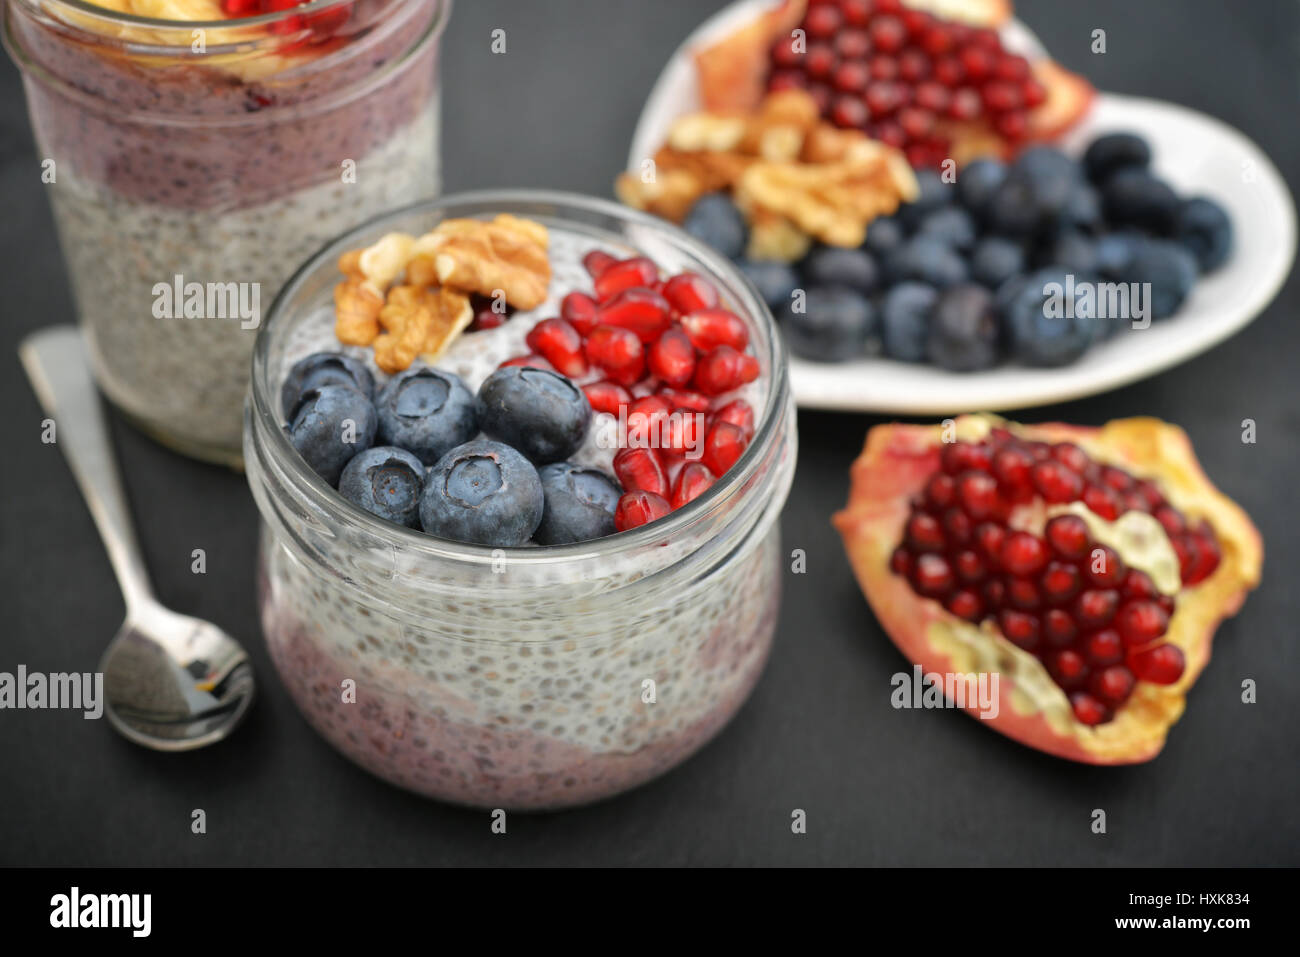 Pudding with chia seeds, yogurt and fresh fruits in glass jars on black background Stock Photo